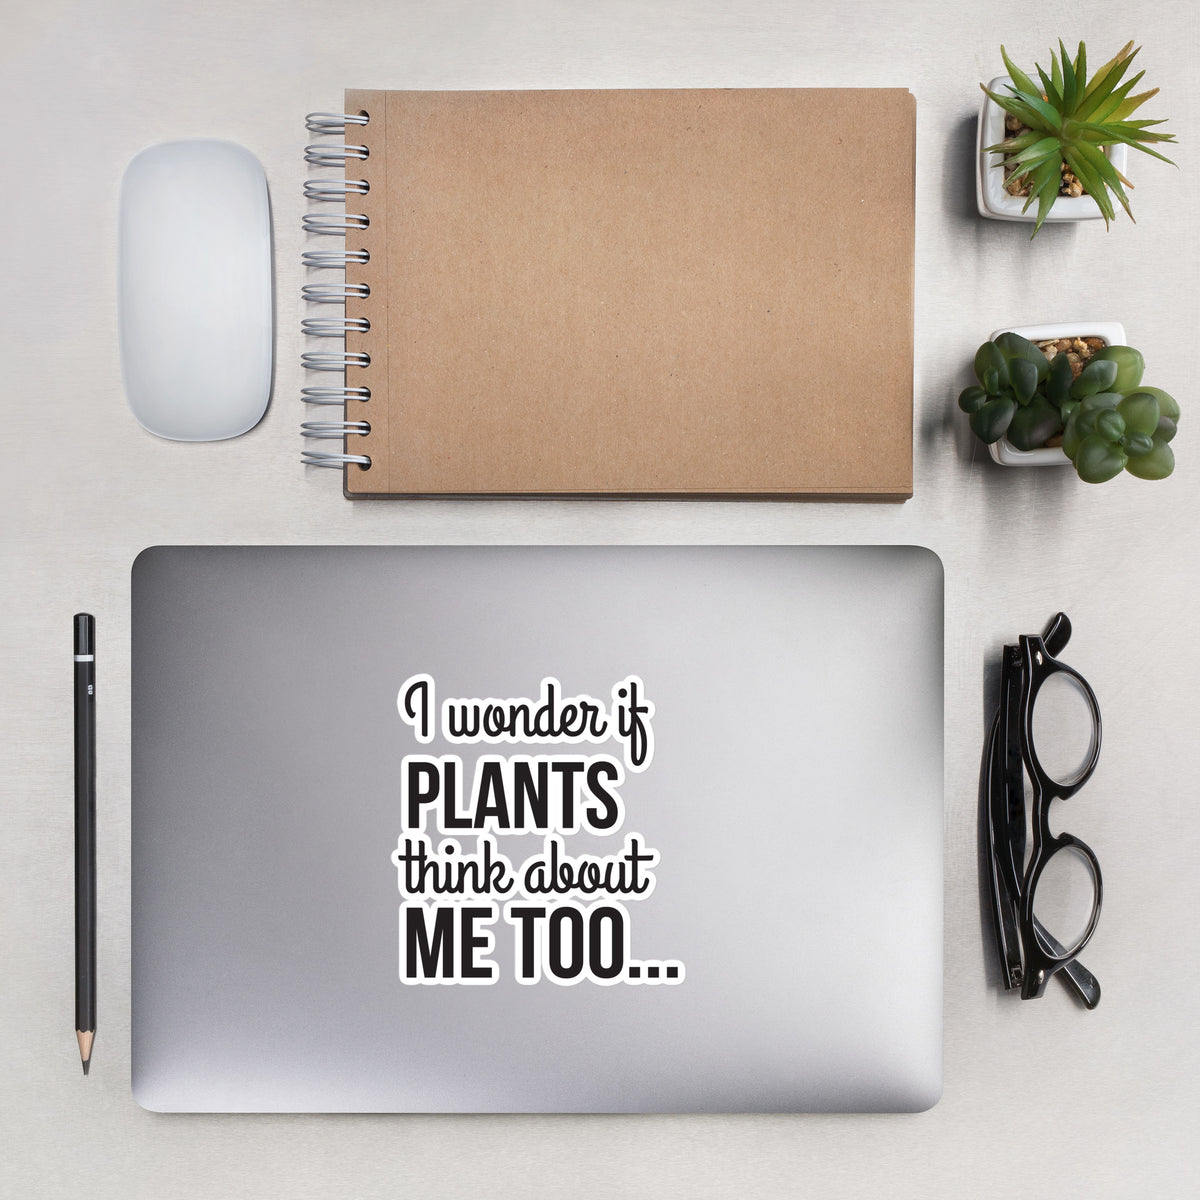 PLANTS THINK ABOUT ME Sticker